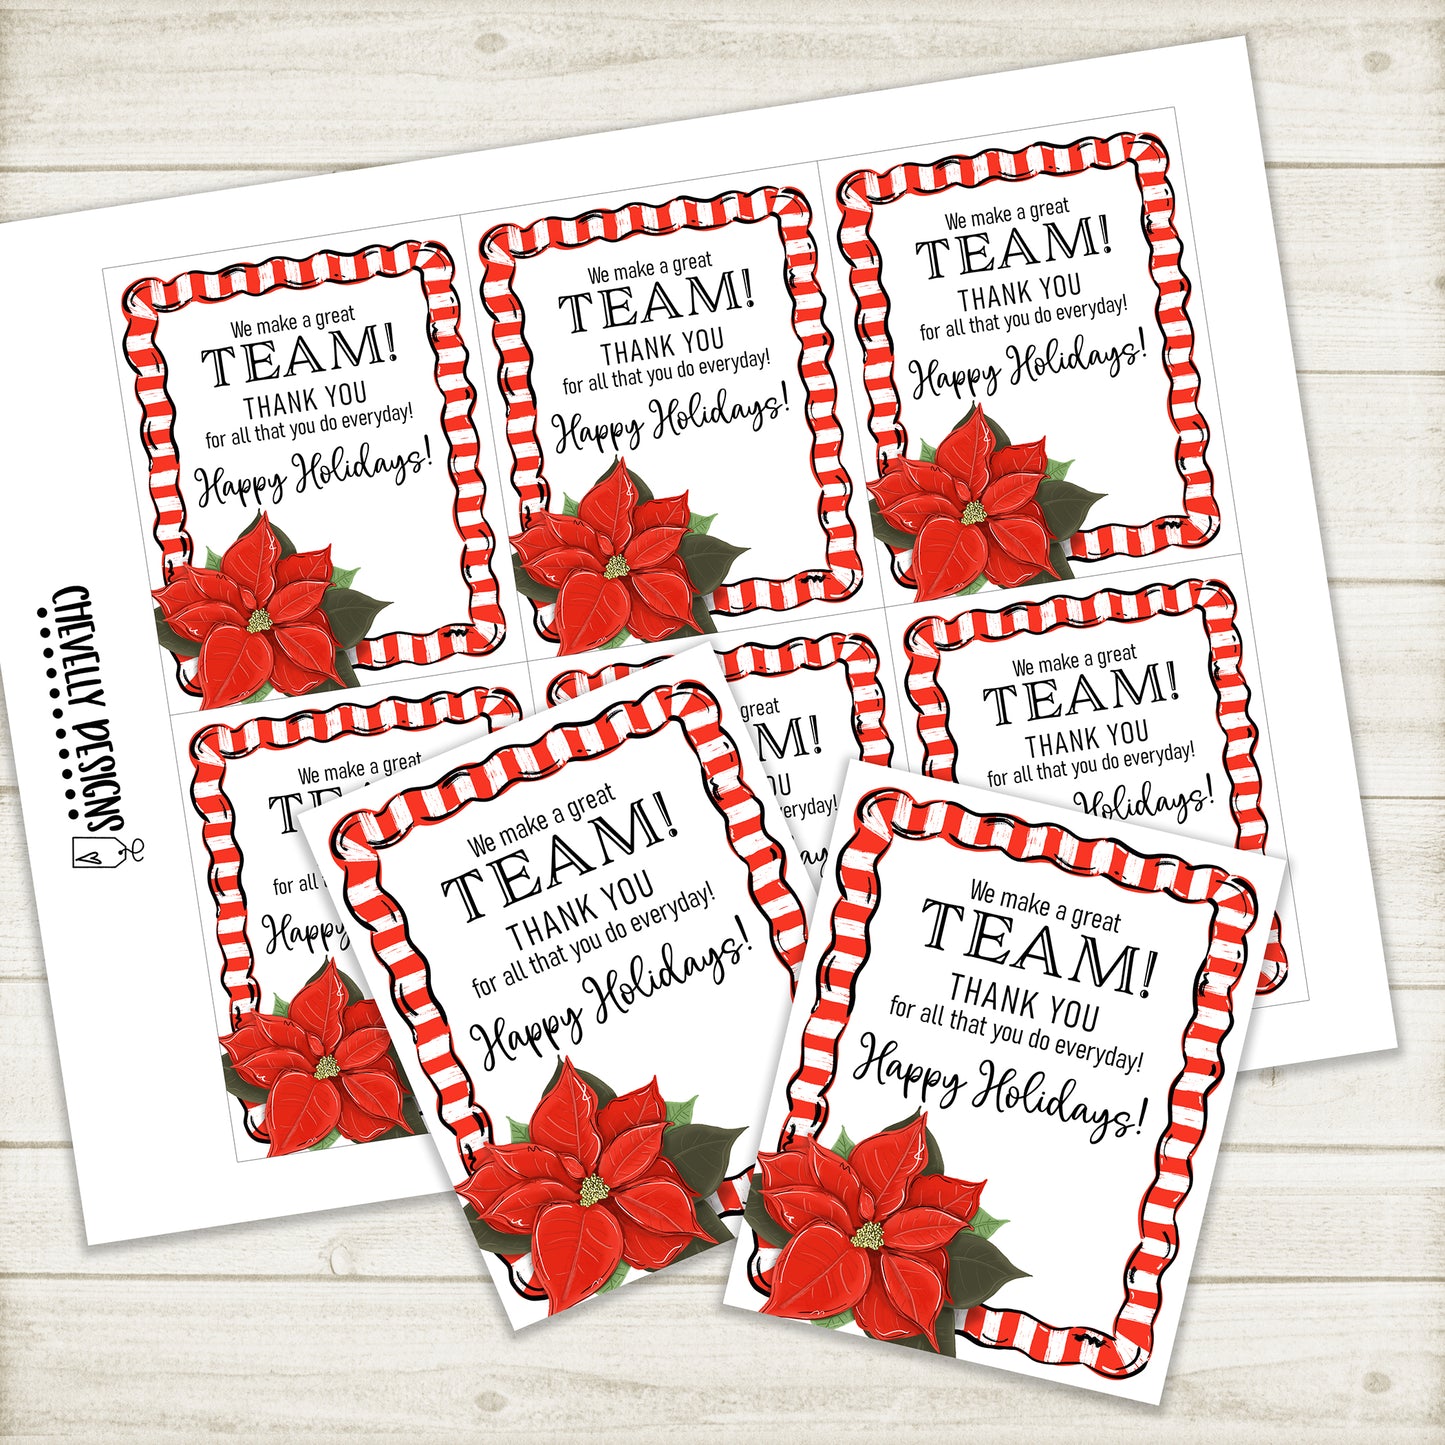 Printable Christmas Gift Tags - We make a Great Team with Poinsettia Frame >>>Instant Digital Download<<<